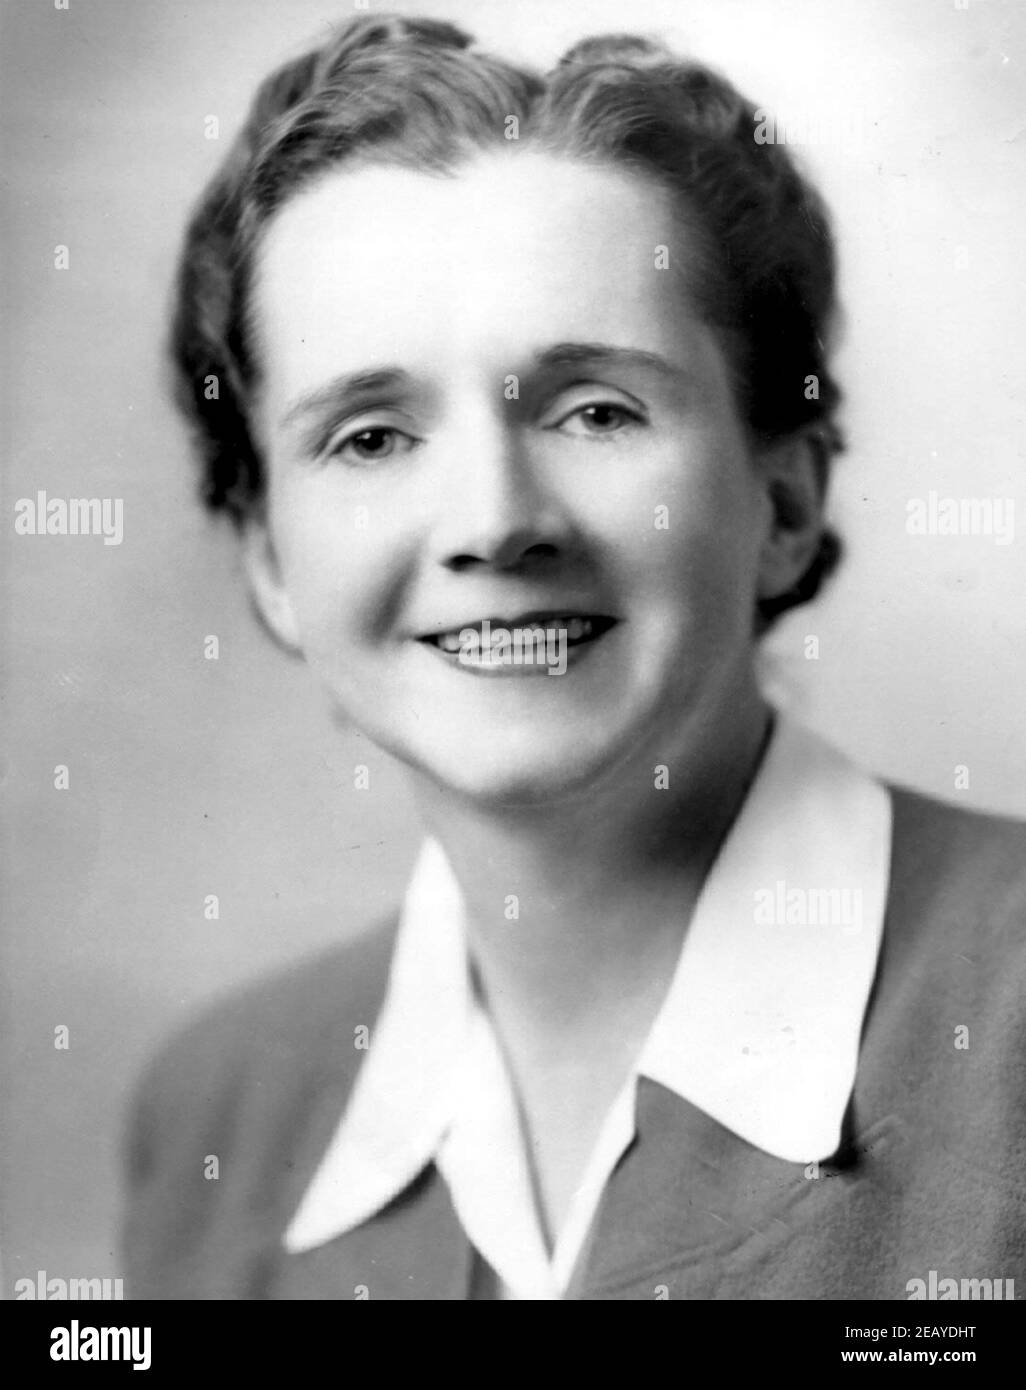 RACHEL CARSON (1907-1964) American marine biologist and author Silent Spring. Staff photo taken for the U.S. Fish and Wildlife Service in 1940 Stock Photo